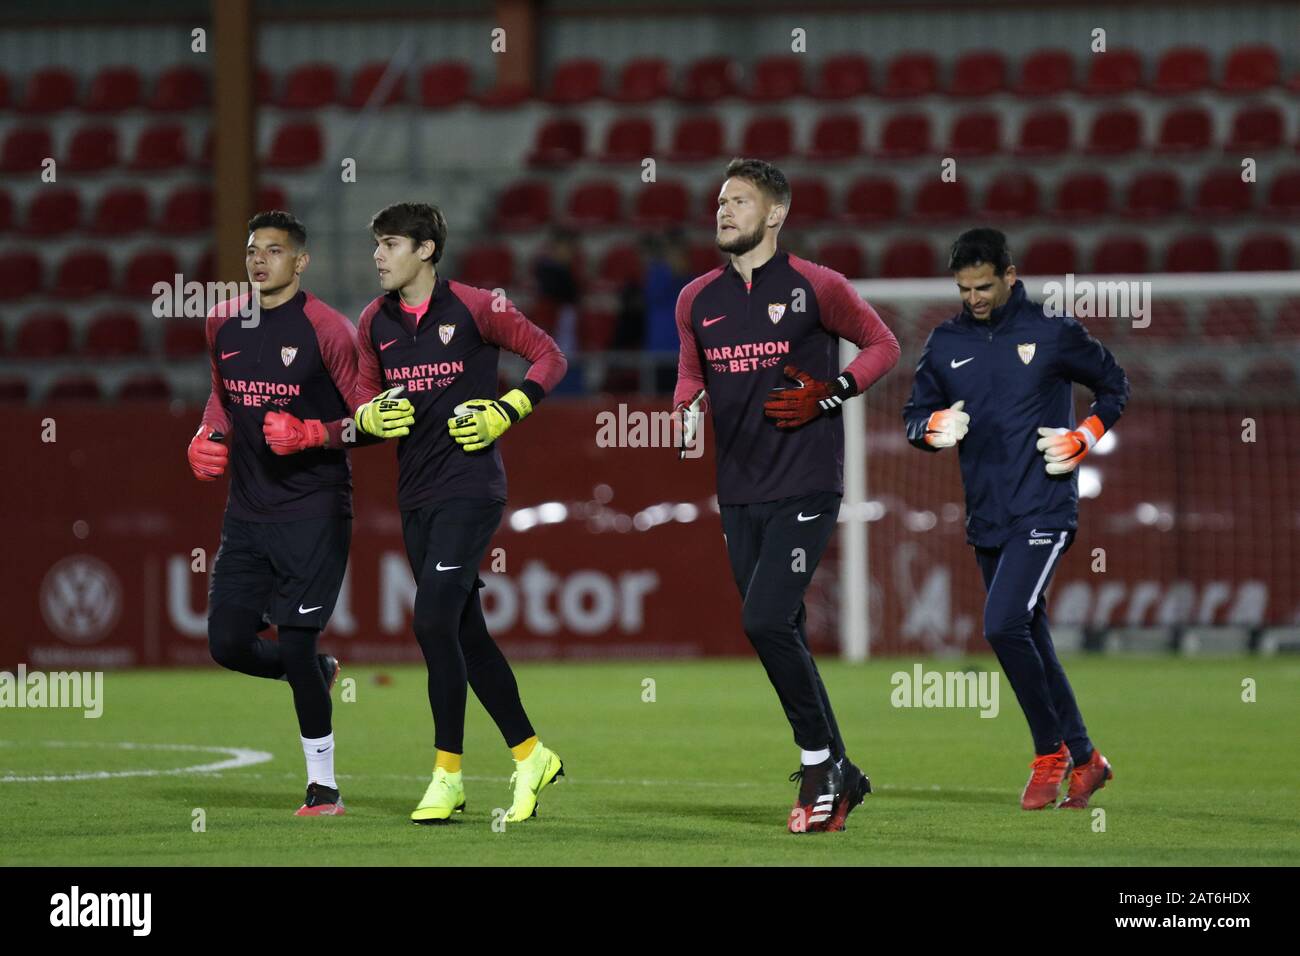 Miranda De Ebro, Burgos, SPAIN. 30th Jan, 2020. Sevilla FC goalkeepers JAVI DIAZ (with yellow gloves) and VACLÃK (with red gloves) warming up before the game between Mirandes and Sevilla. The CD Mirandes, La Liga SmartBank team, hosted Sevilla FC for the 1/8 Copa del Rey match at Anduva stadium, in Miranda de Ebro. Credit: Edu Del Fresno/ZUMA Wire/Alamy Live News Stock Photo